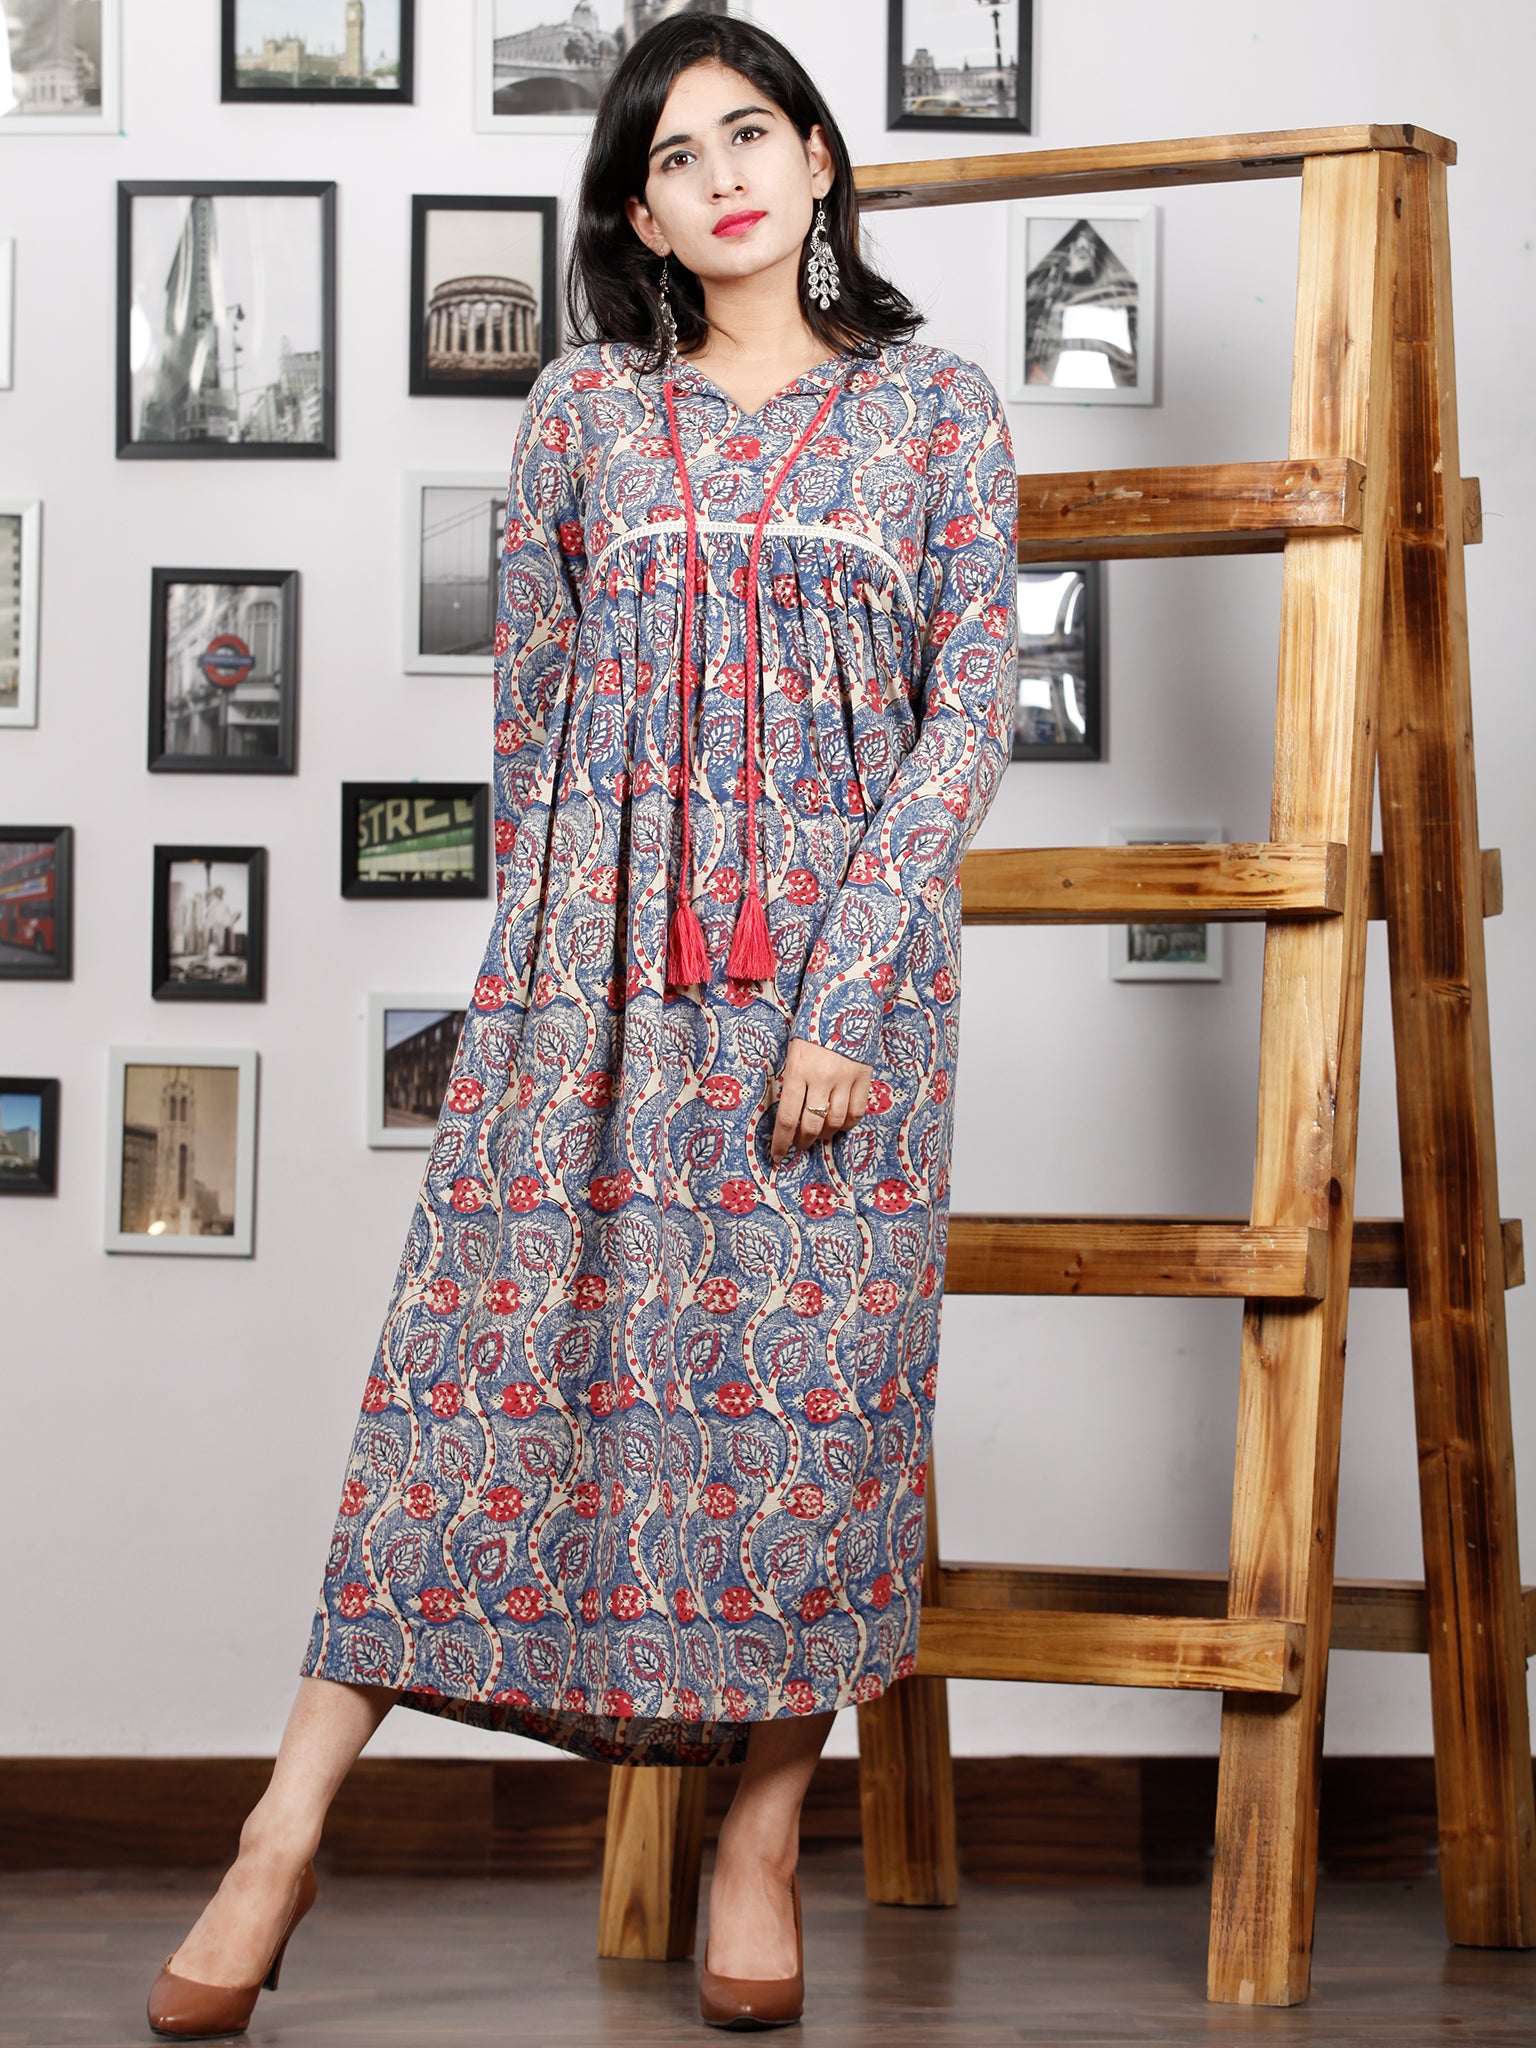 Indigo Beige Coral Hand Block Printed Cotton Dress With Full Sleeves ...